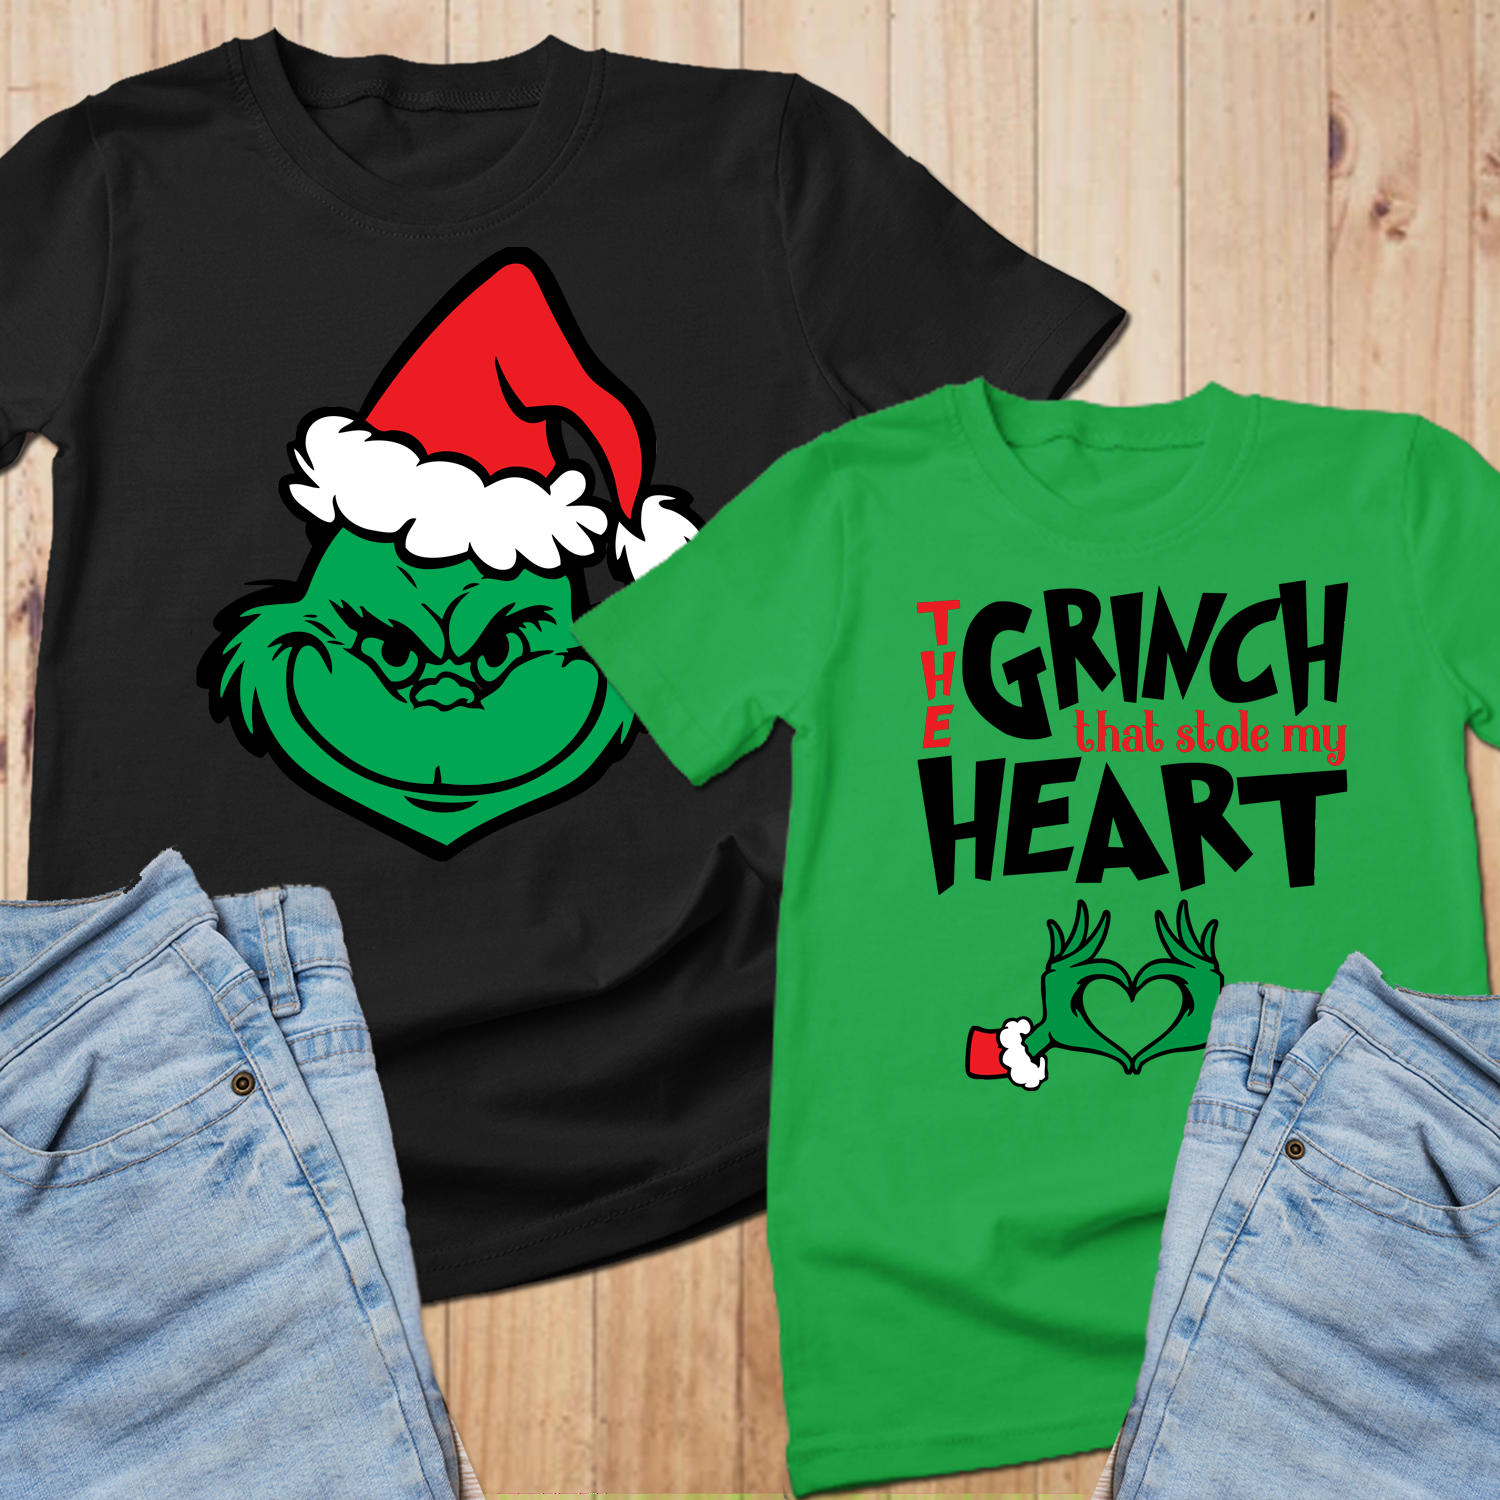 The Grinch that stole my heart sweatshirt, matching couple christmas shirt, christmas shirts couples - Wilson Design Group